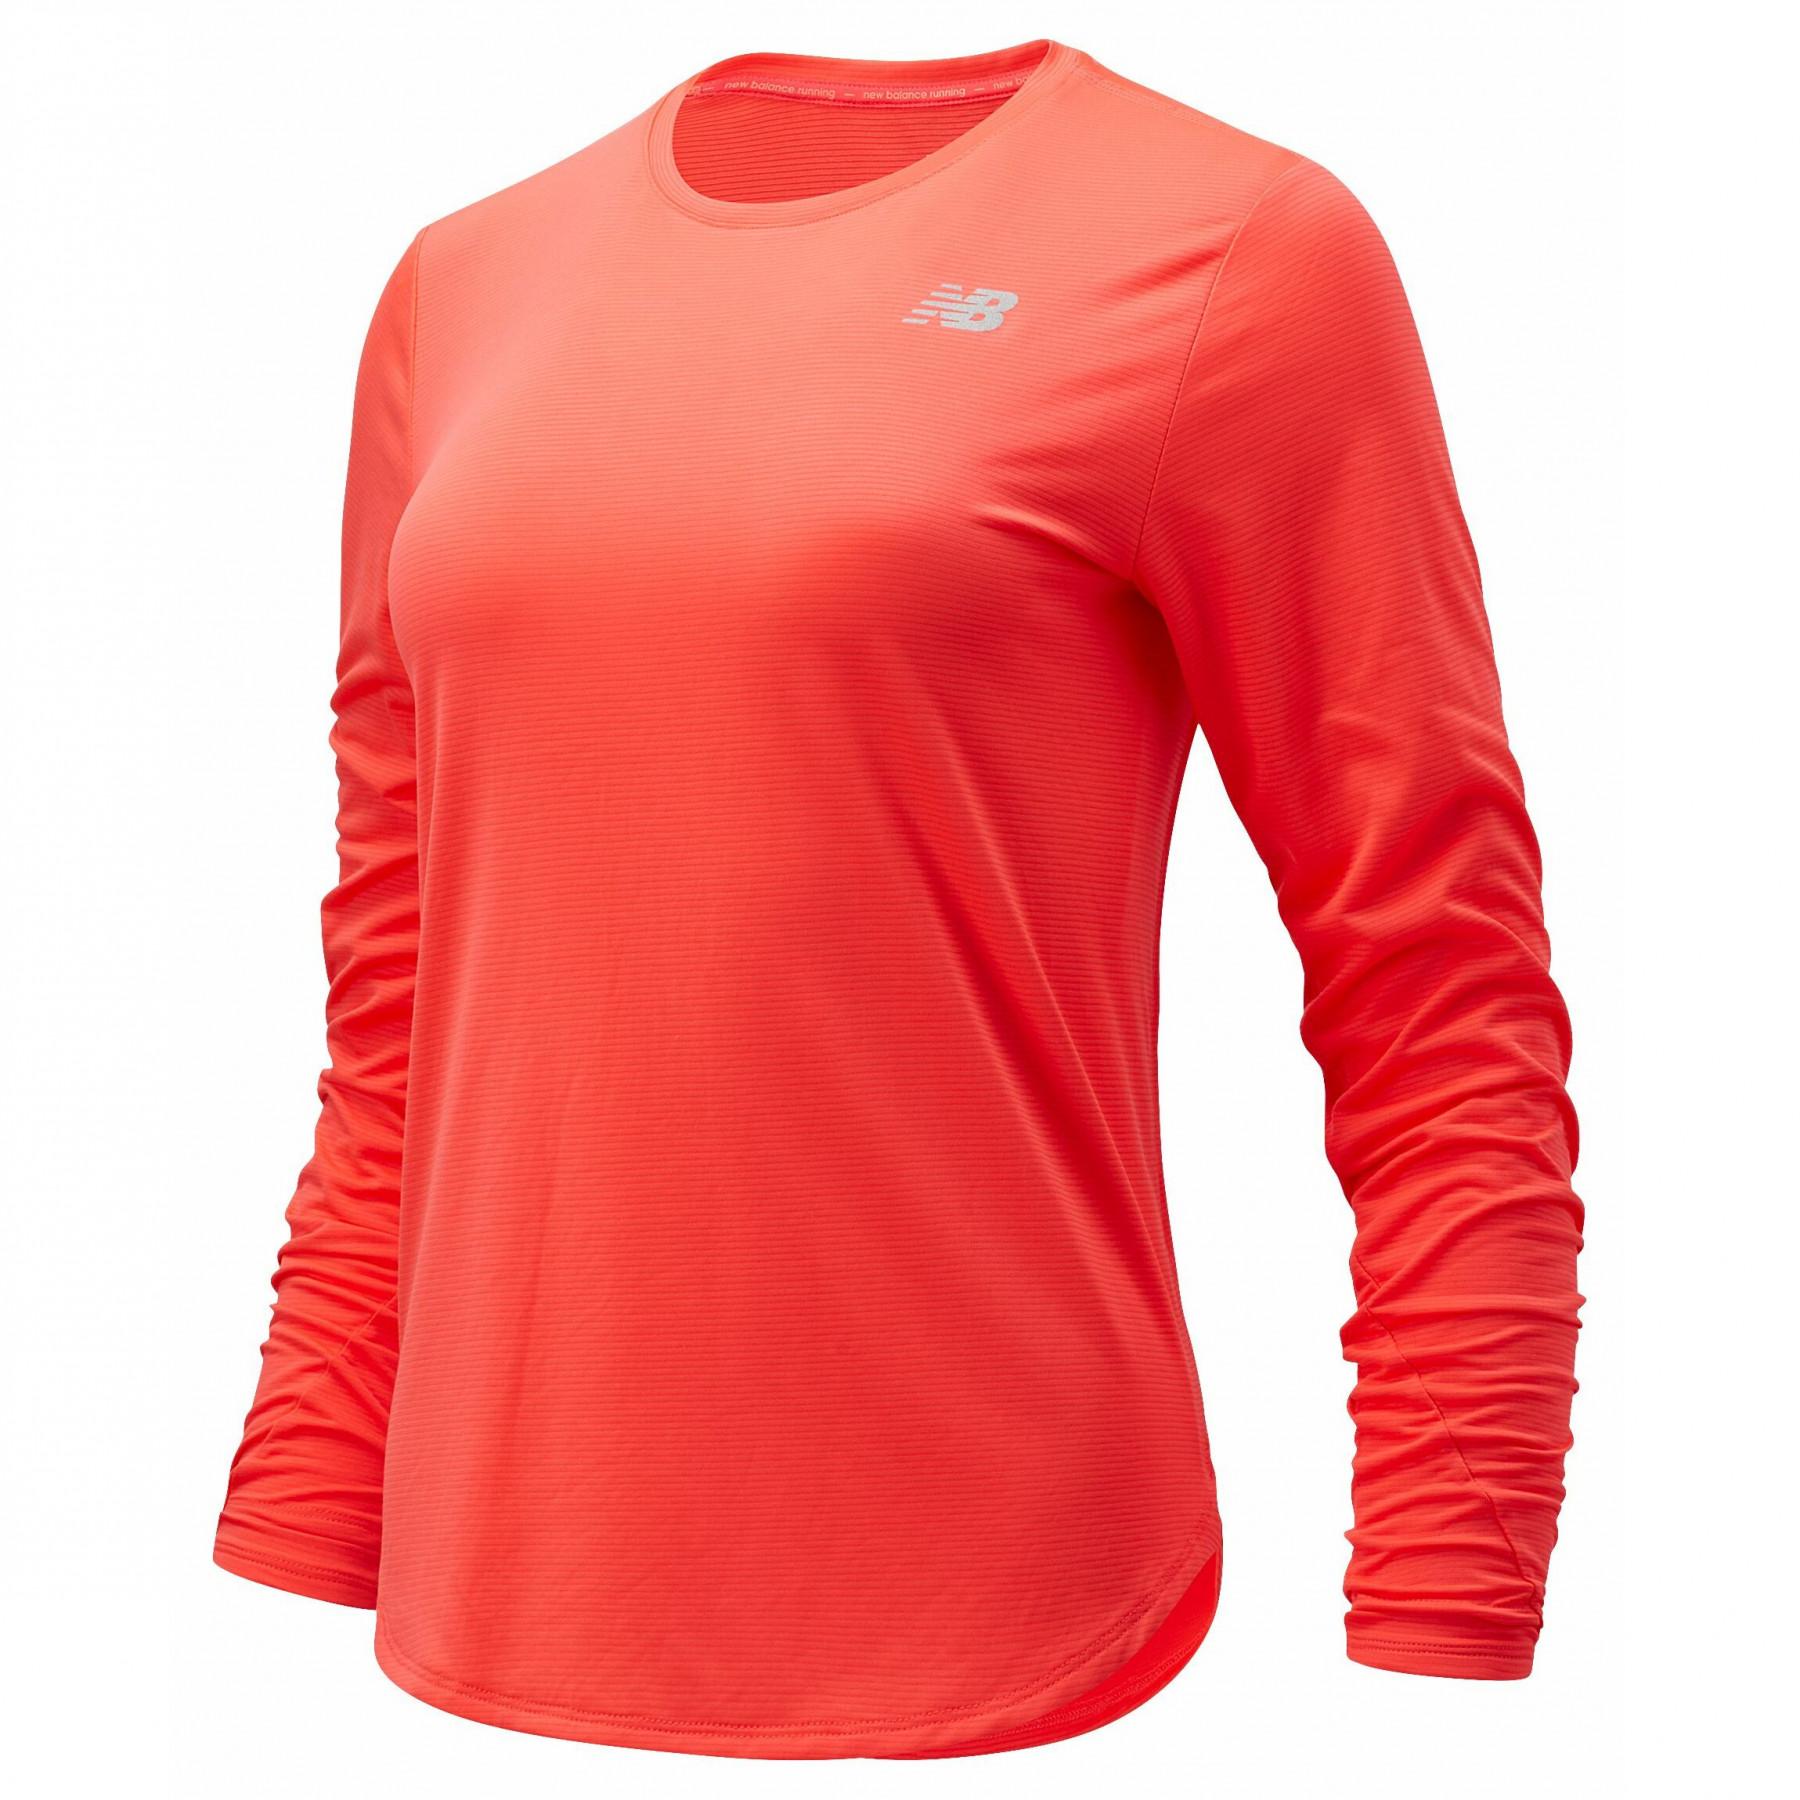 Maillot femme manches longues New Balance accelerate